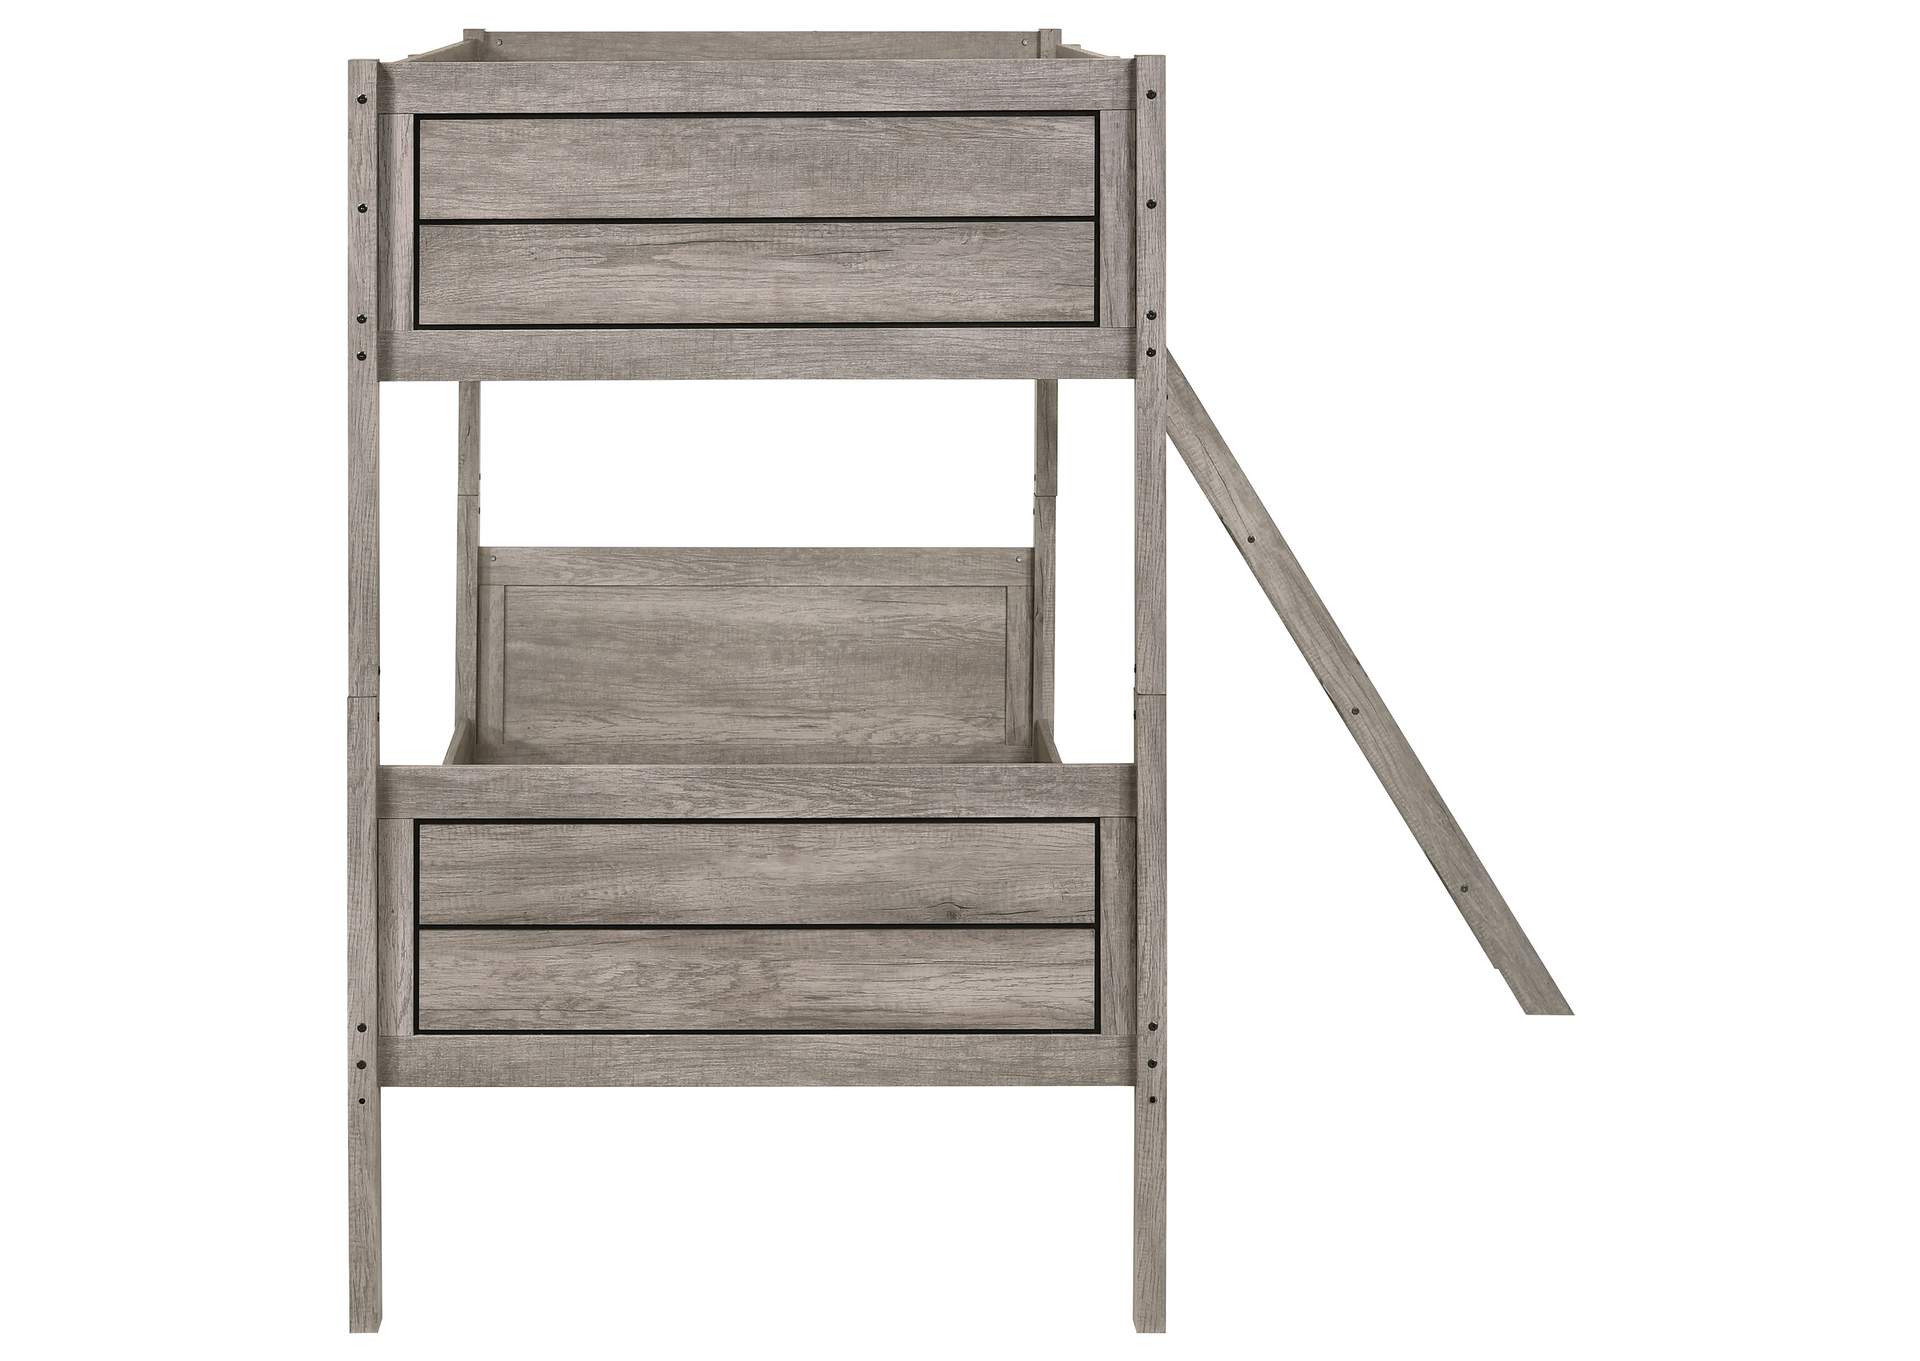 Ryder Twin over Twin Bunk Bed Weathered Taupe,Coaster Furniture